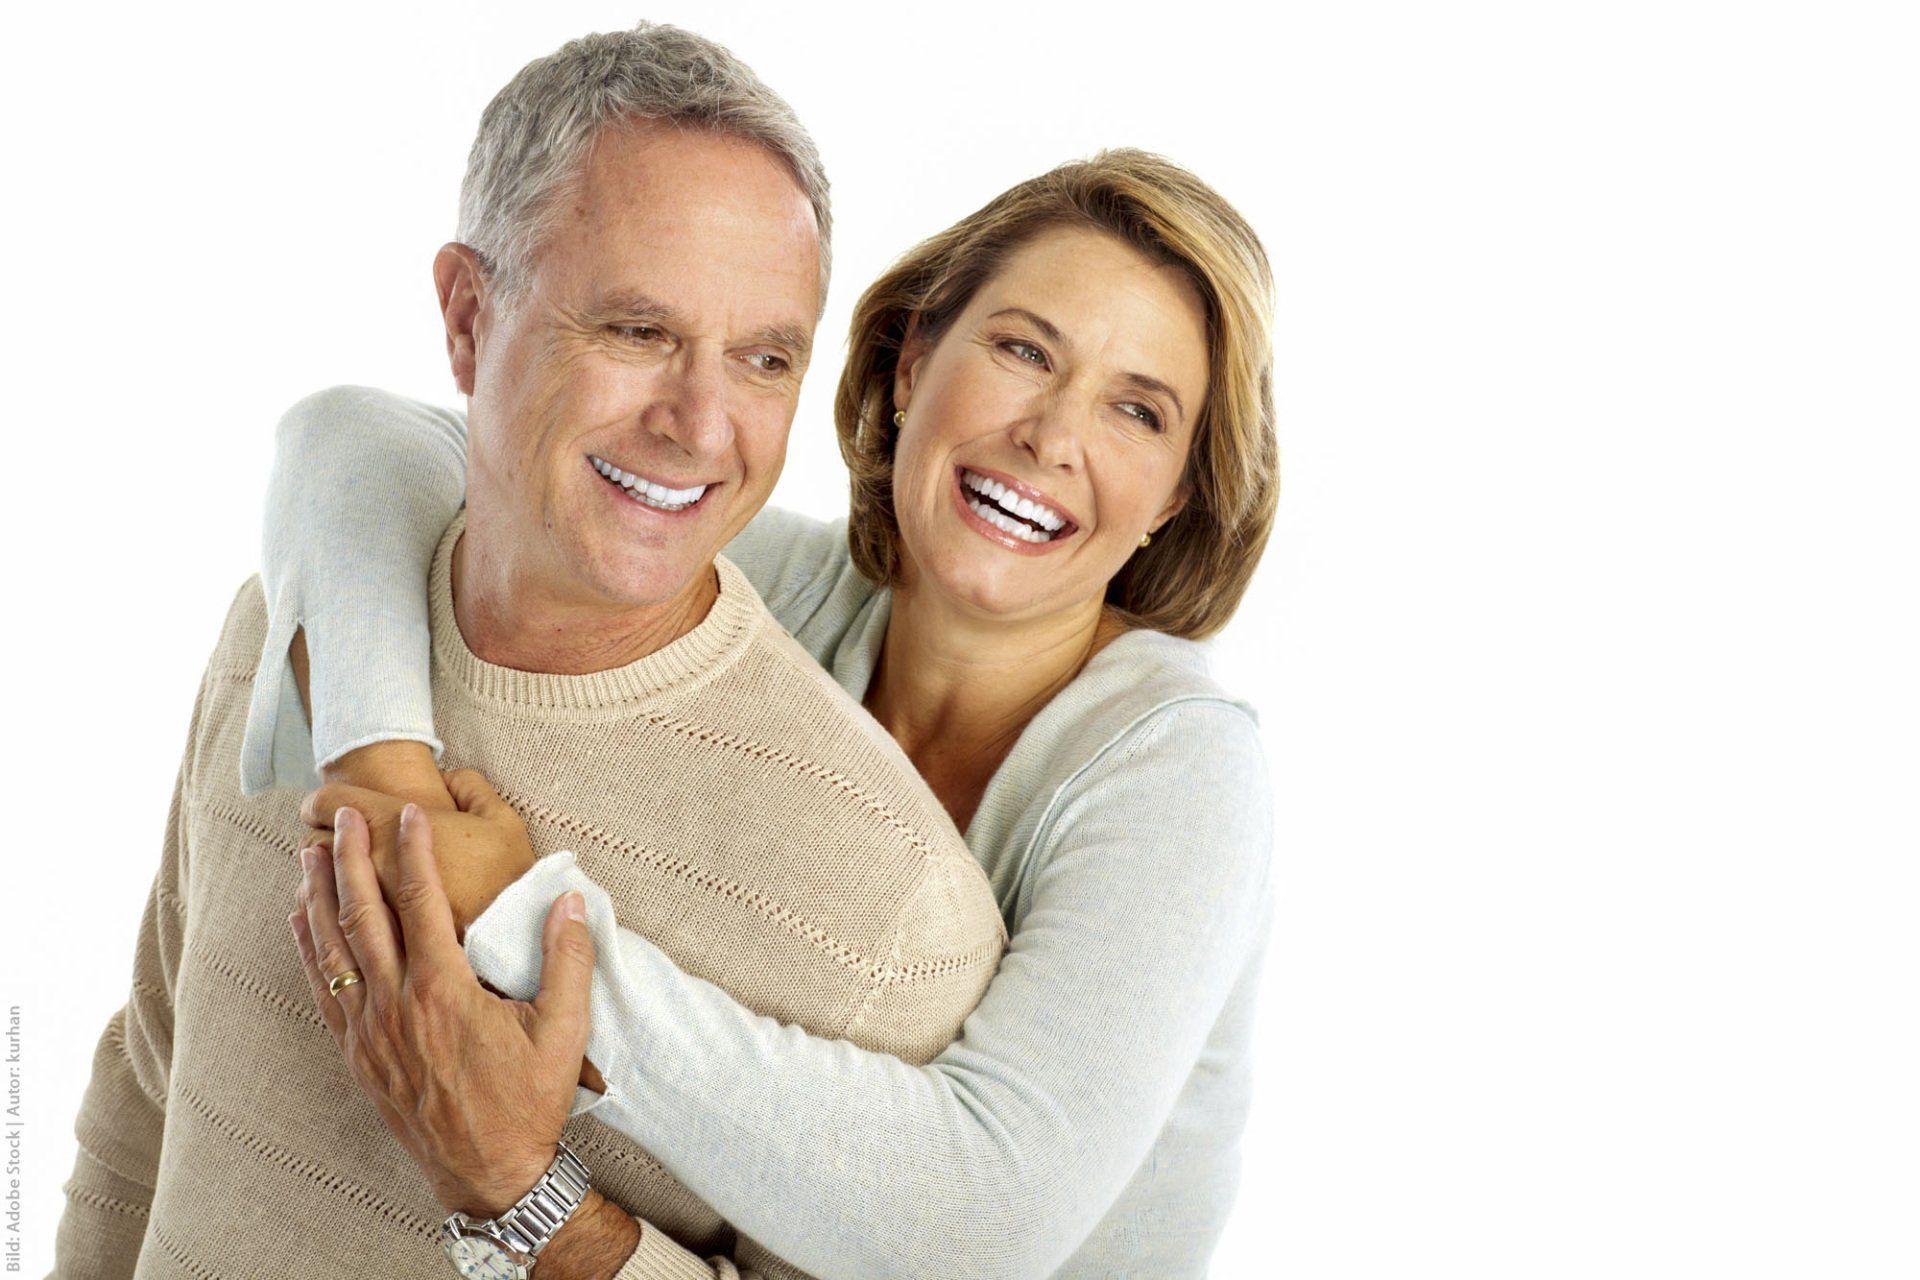 Modern dental implants that last into old age